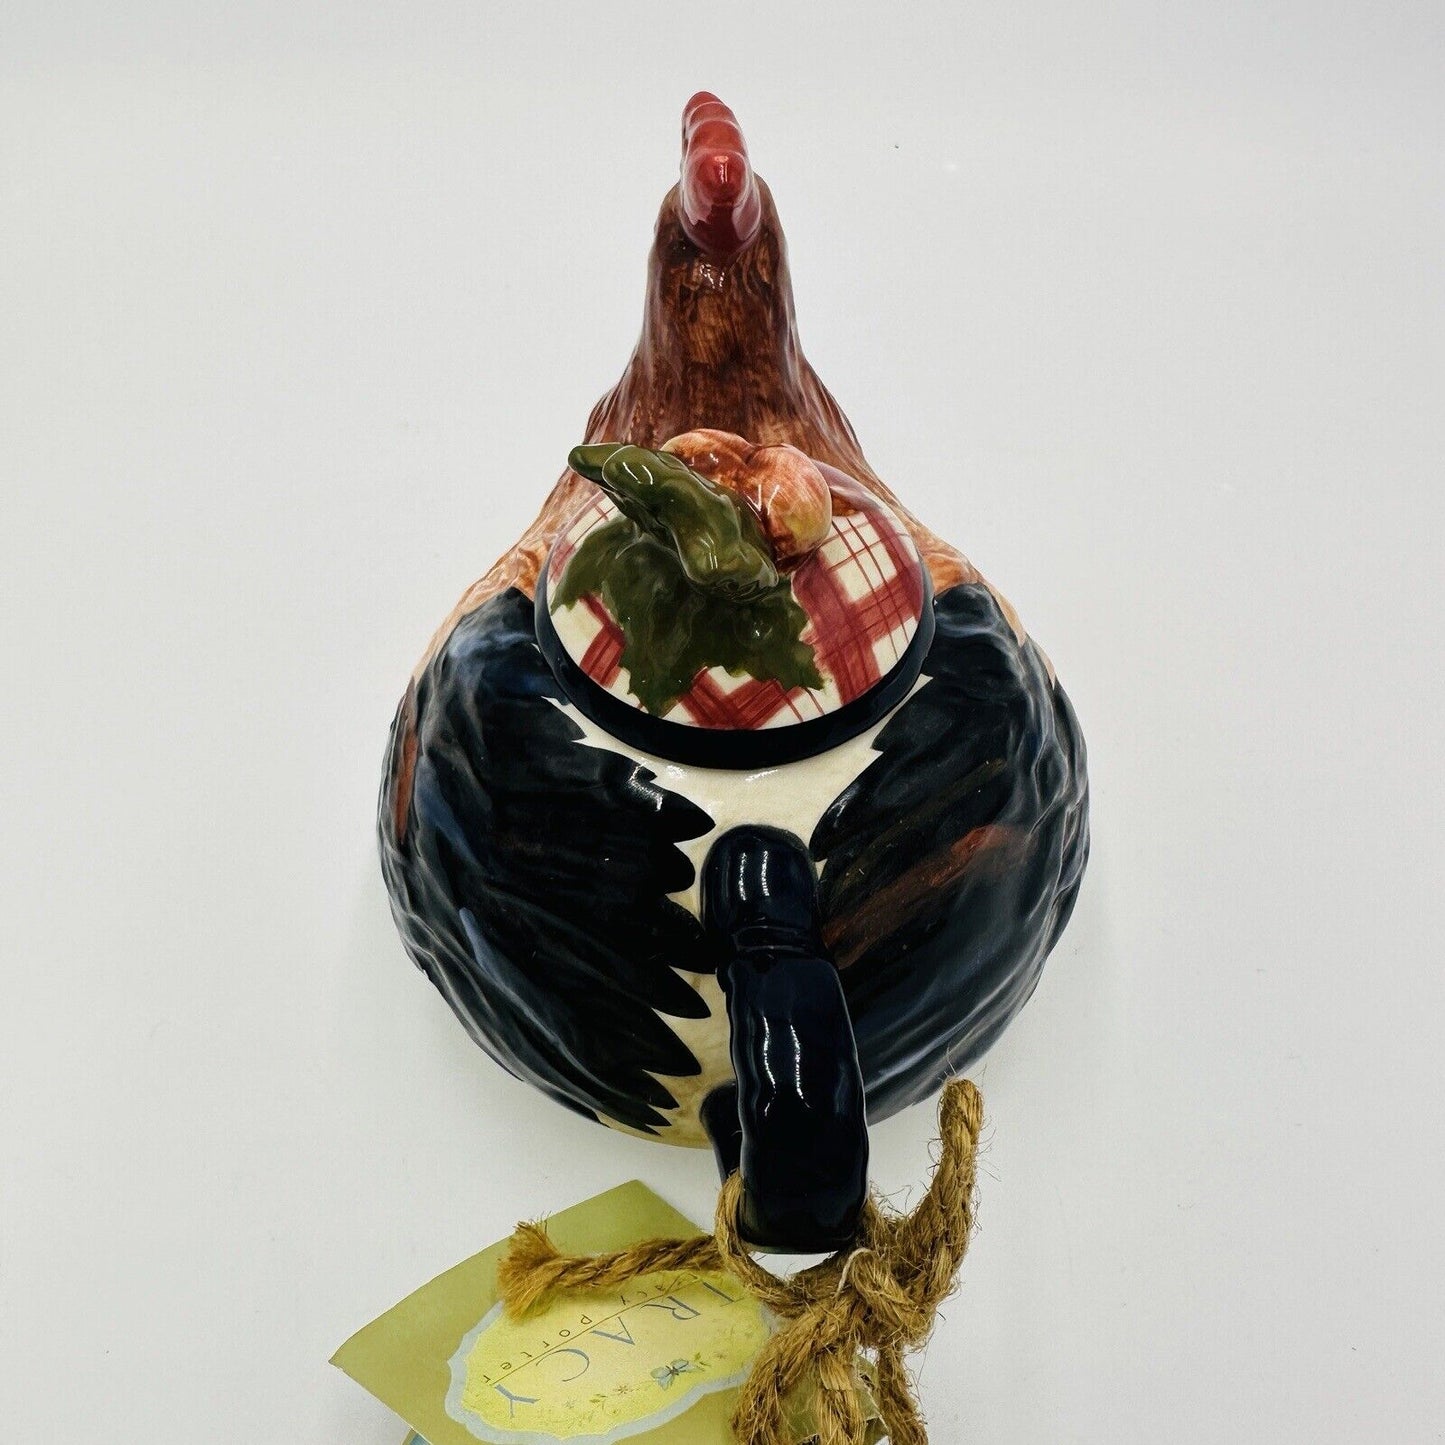 Tracy Porter Stoneware Rooster & Carrots Tea Pot 5.5” stonehouse farm collection